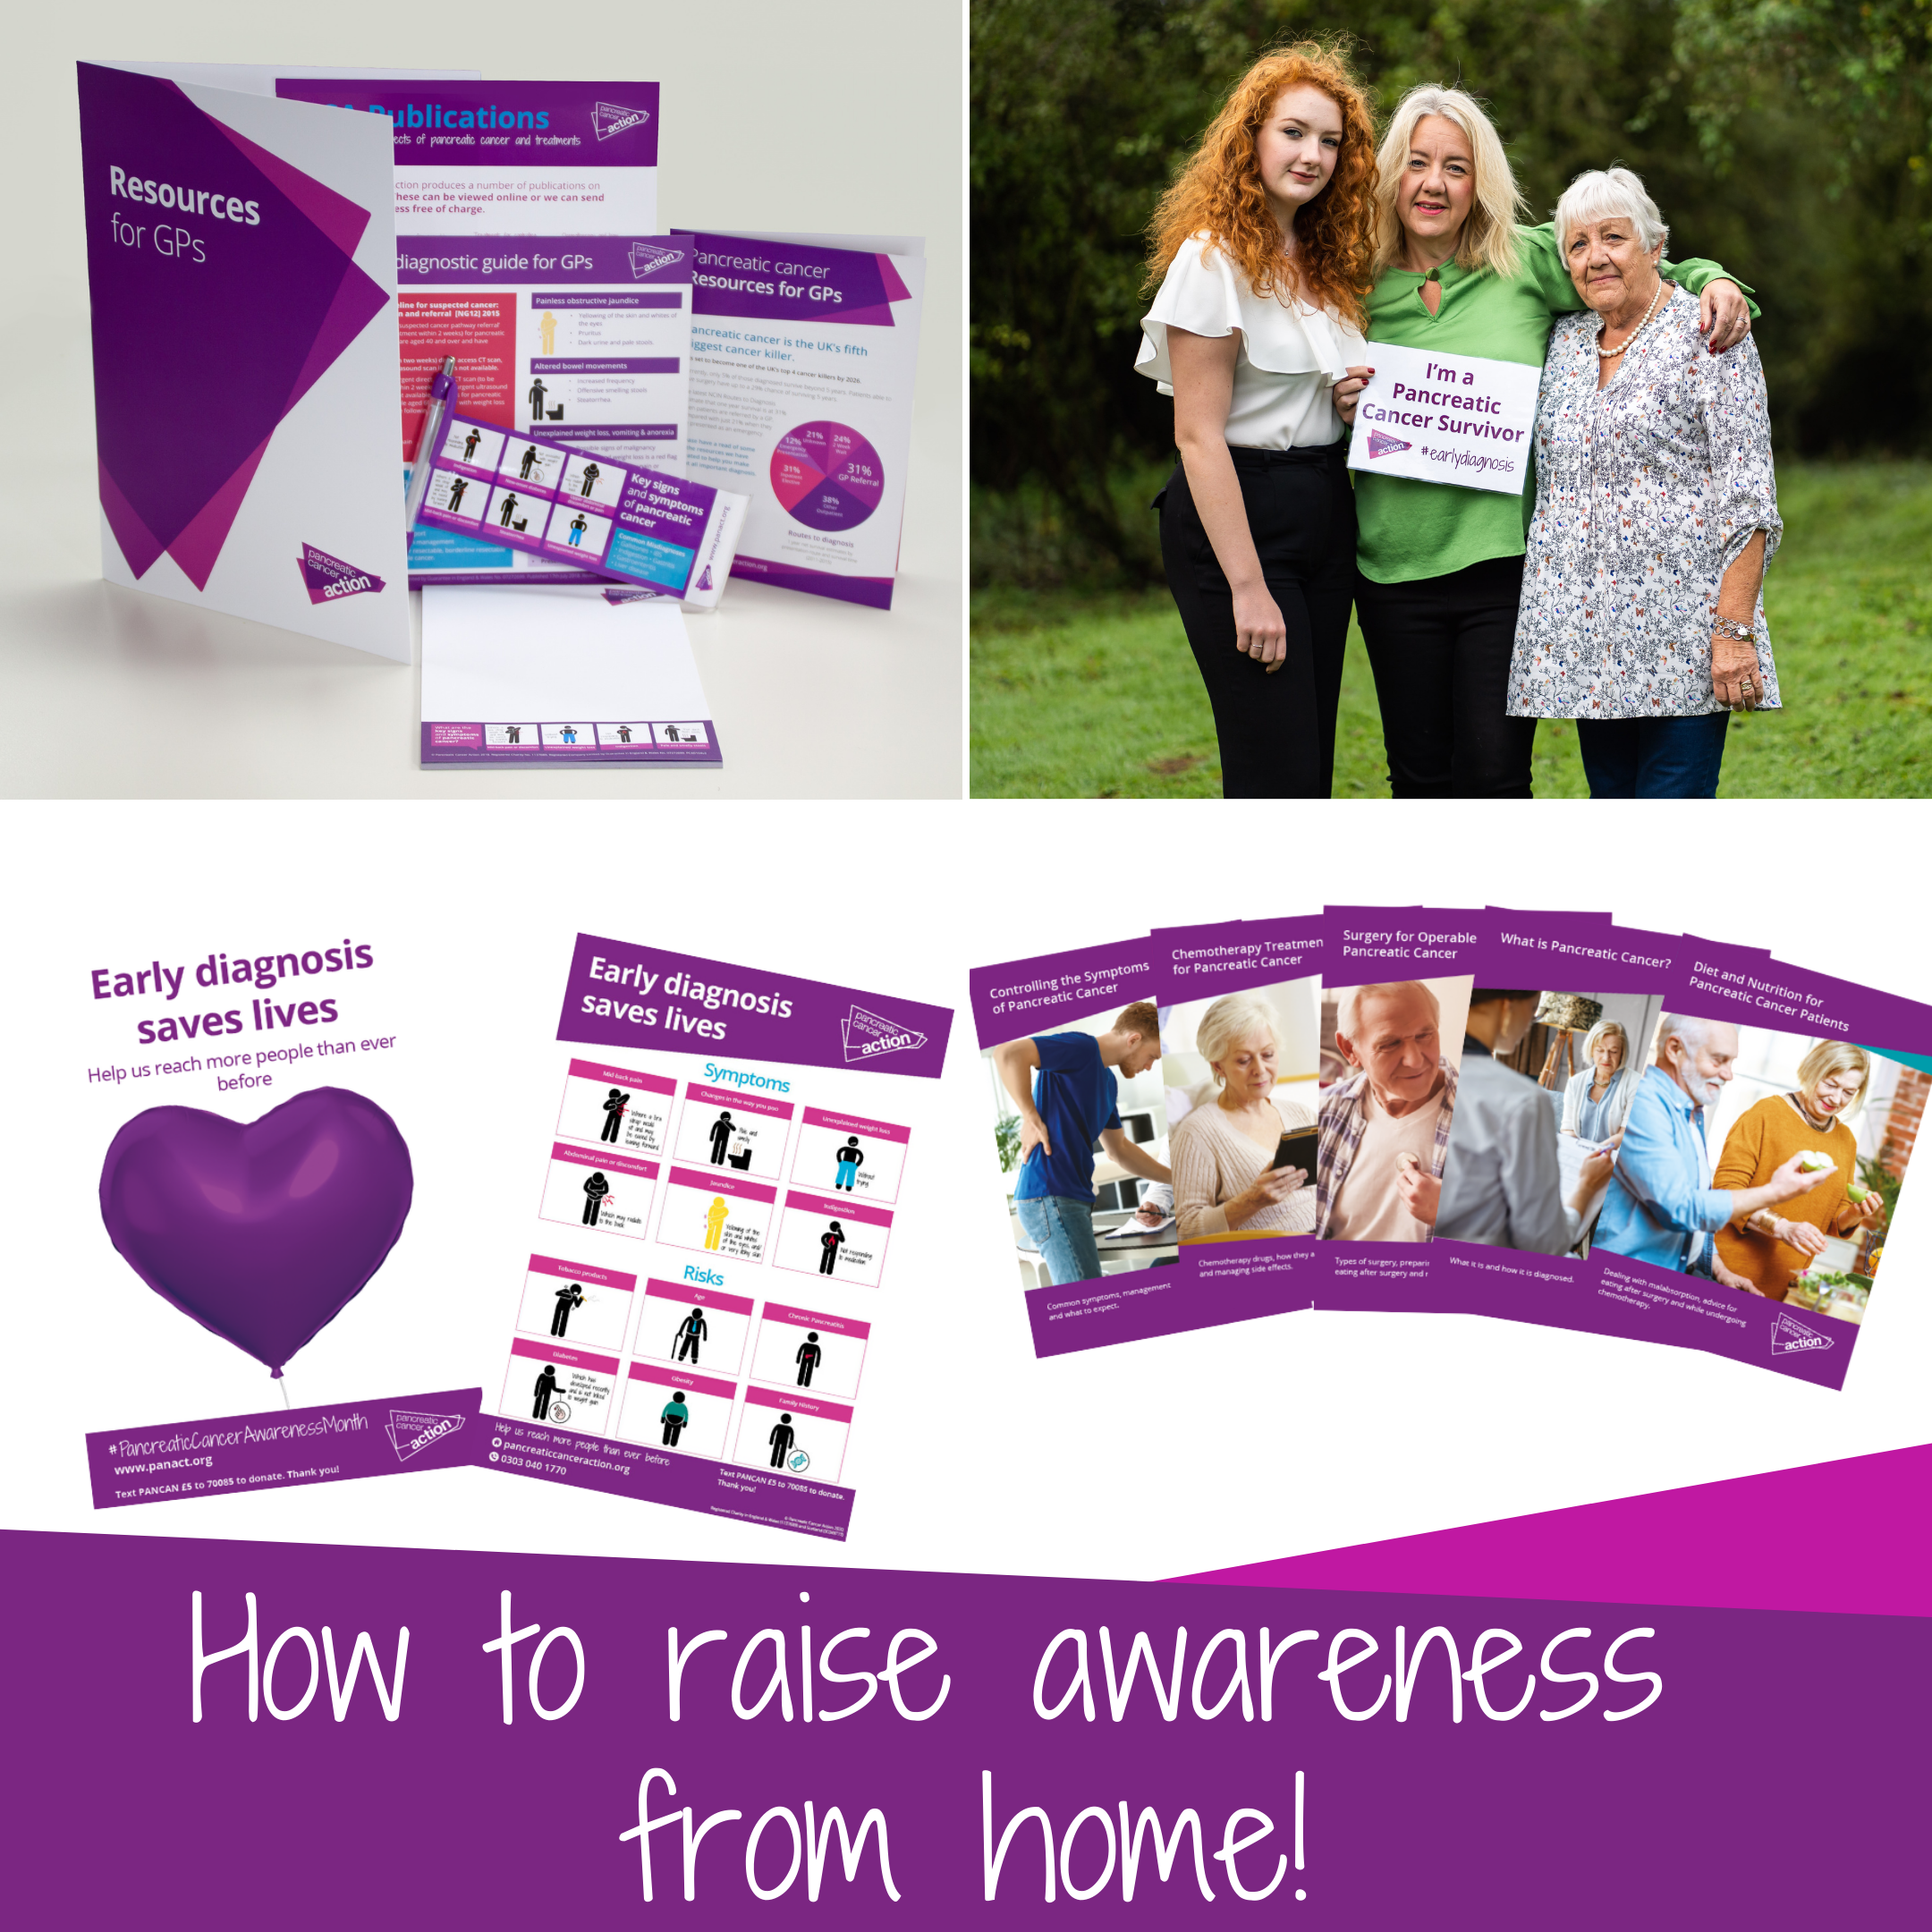 How to raise awareness from home